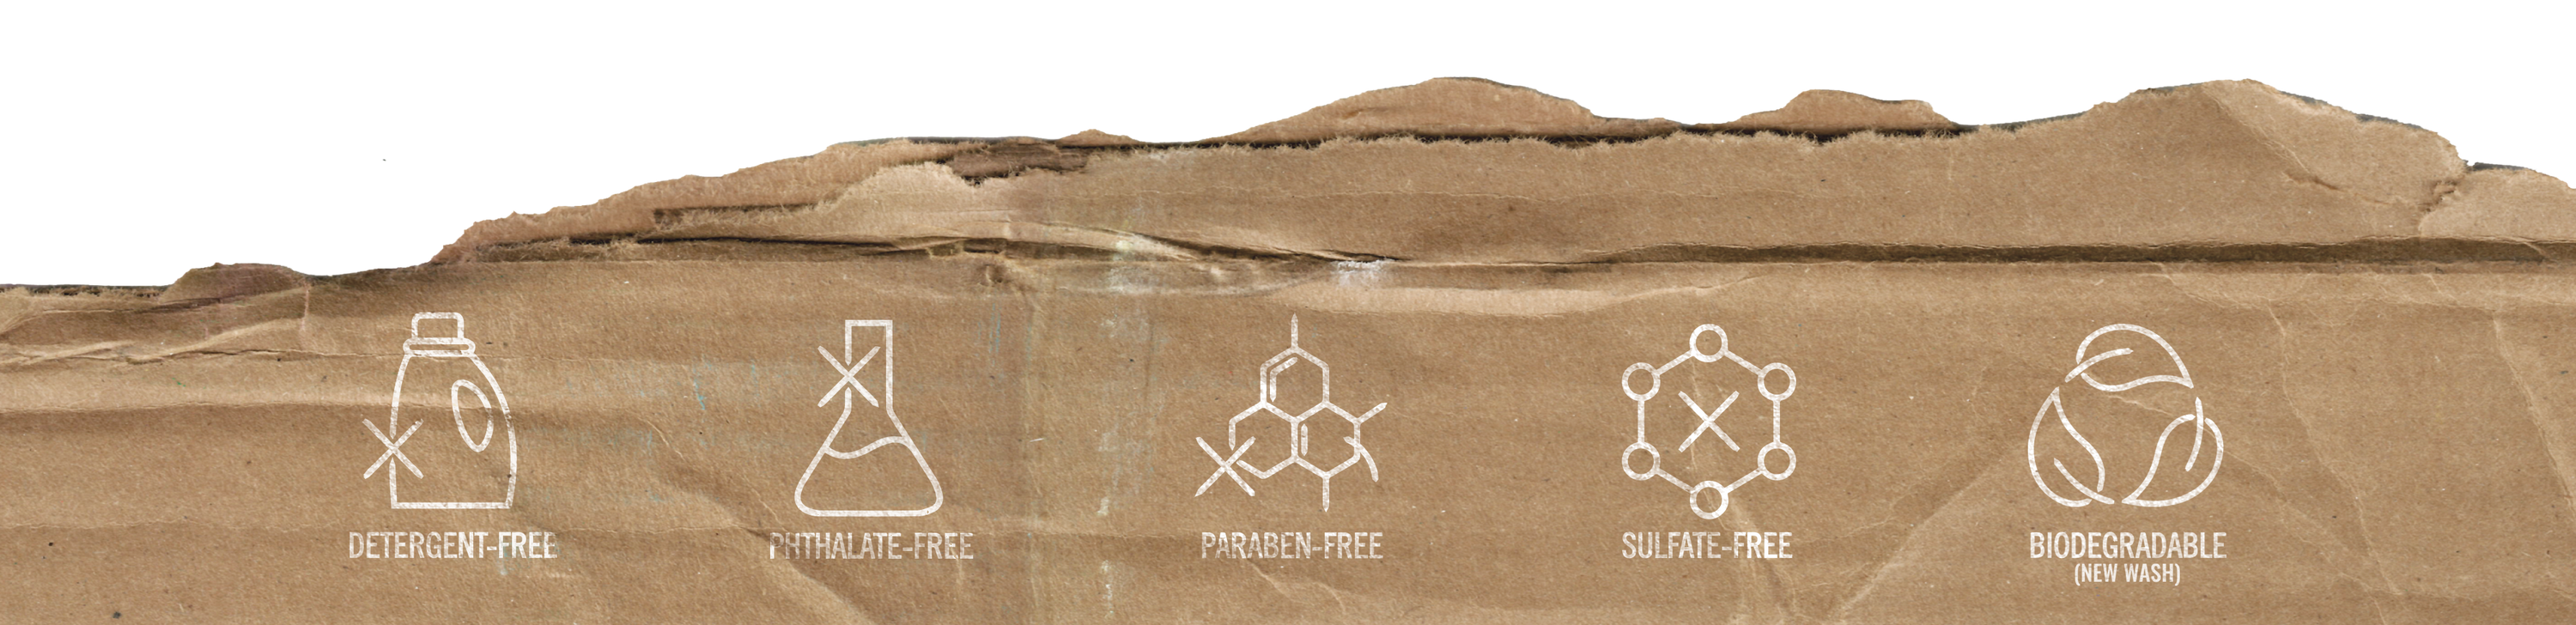 image of cardboard background with icons of detergent free, phthalate free, paraben free, sulfate free, and biodegradable